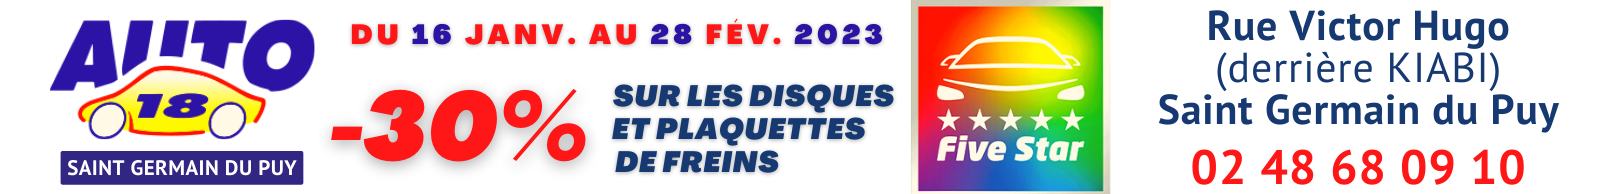 Auto 18 Five Star Bourges 2022